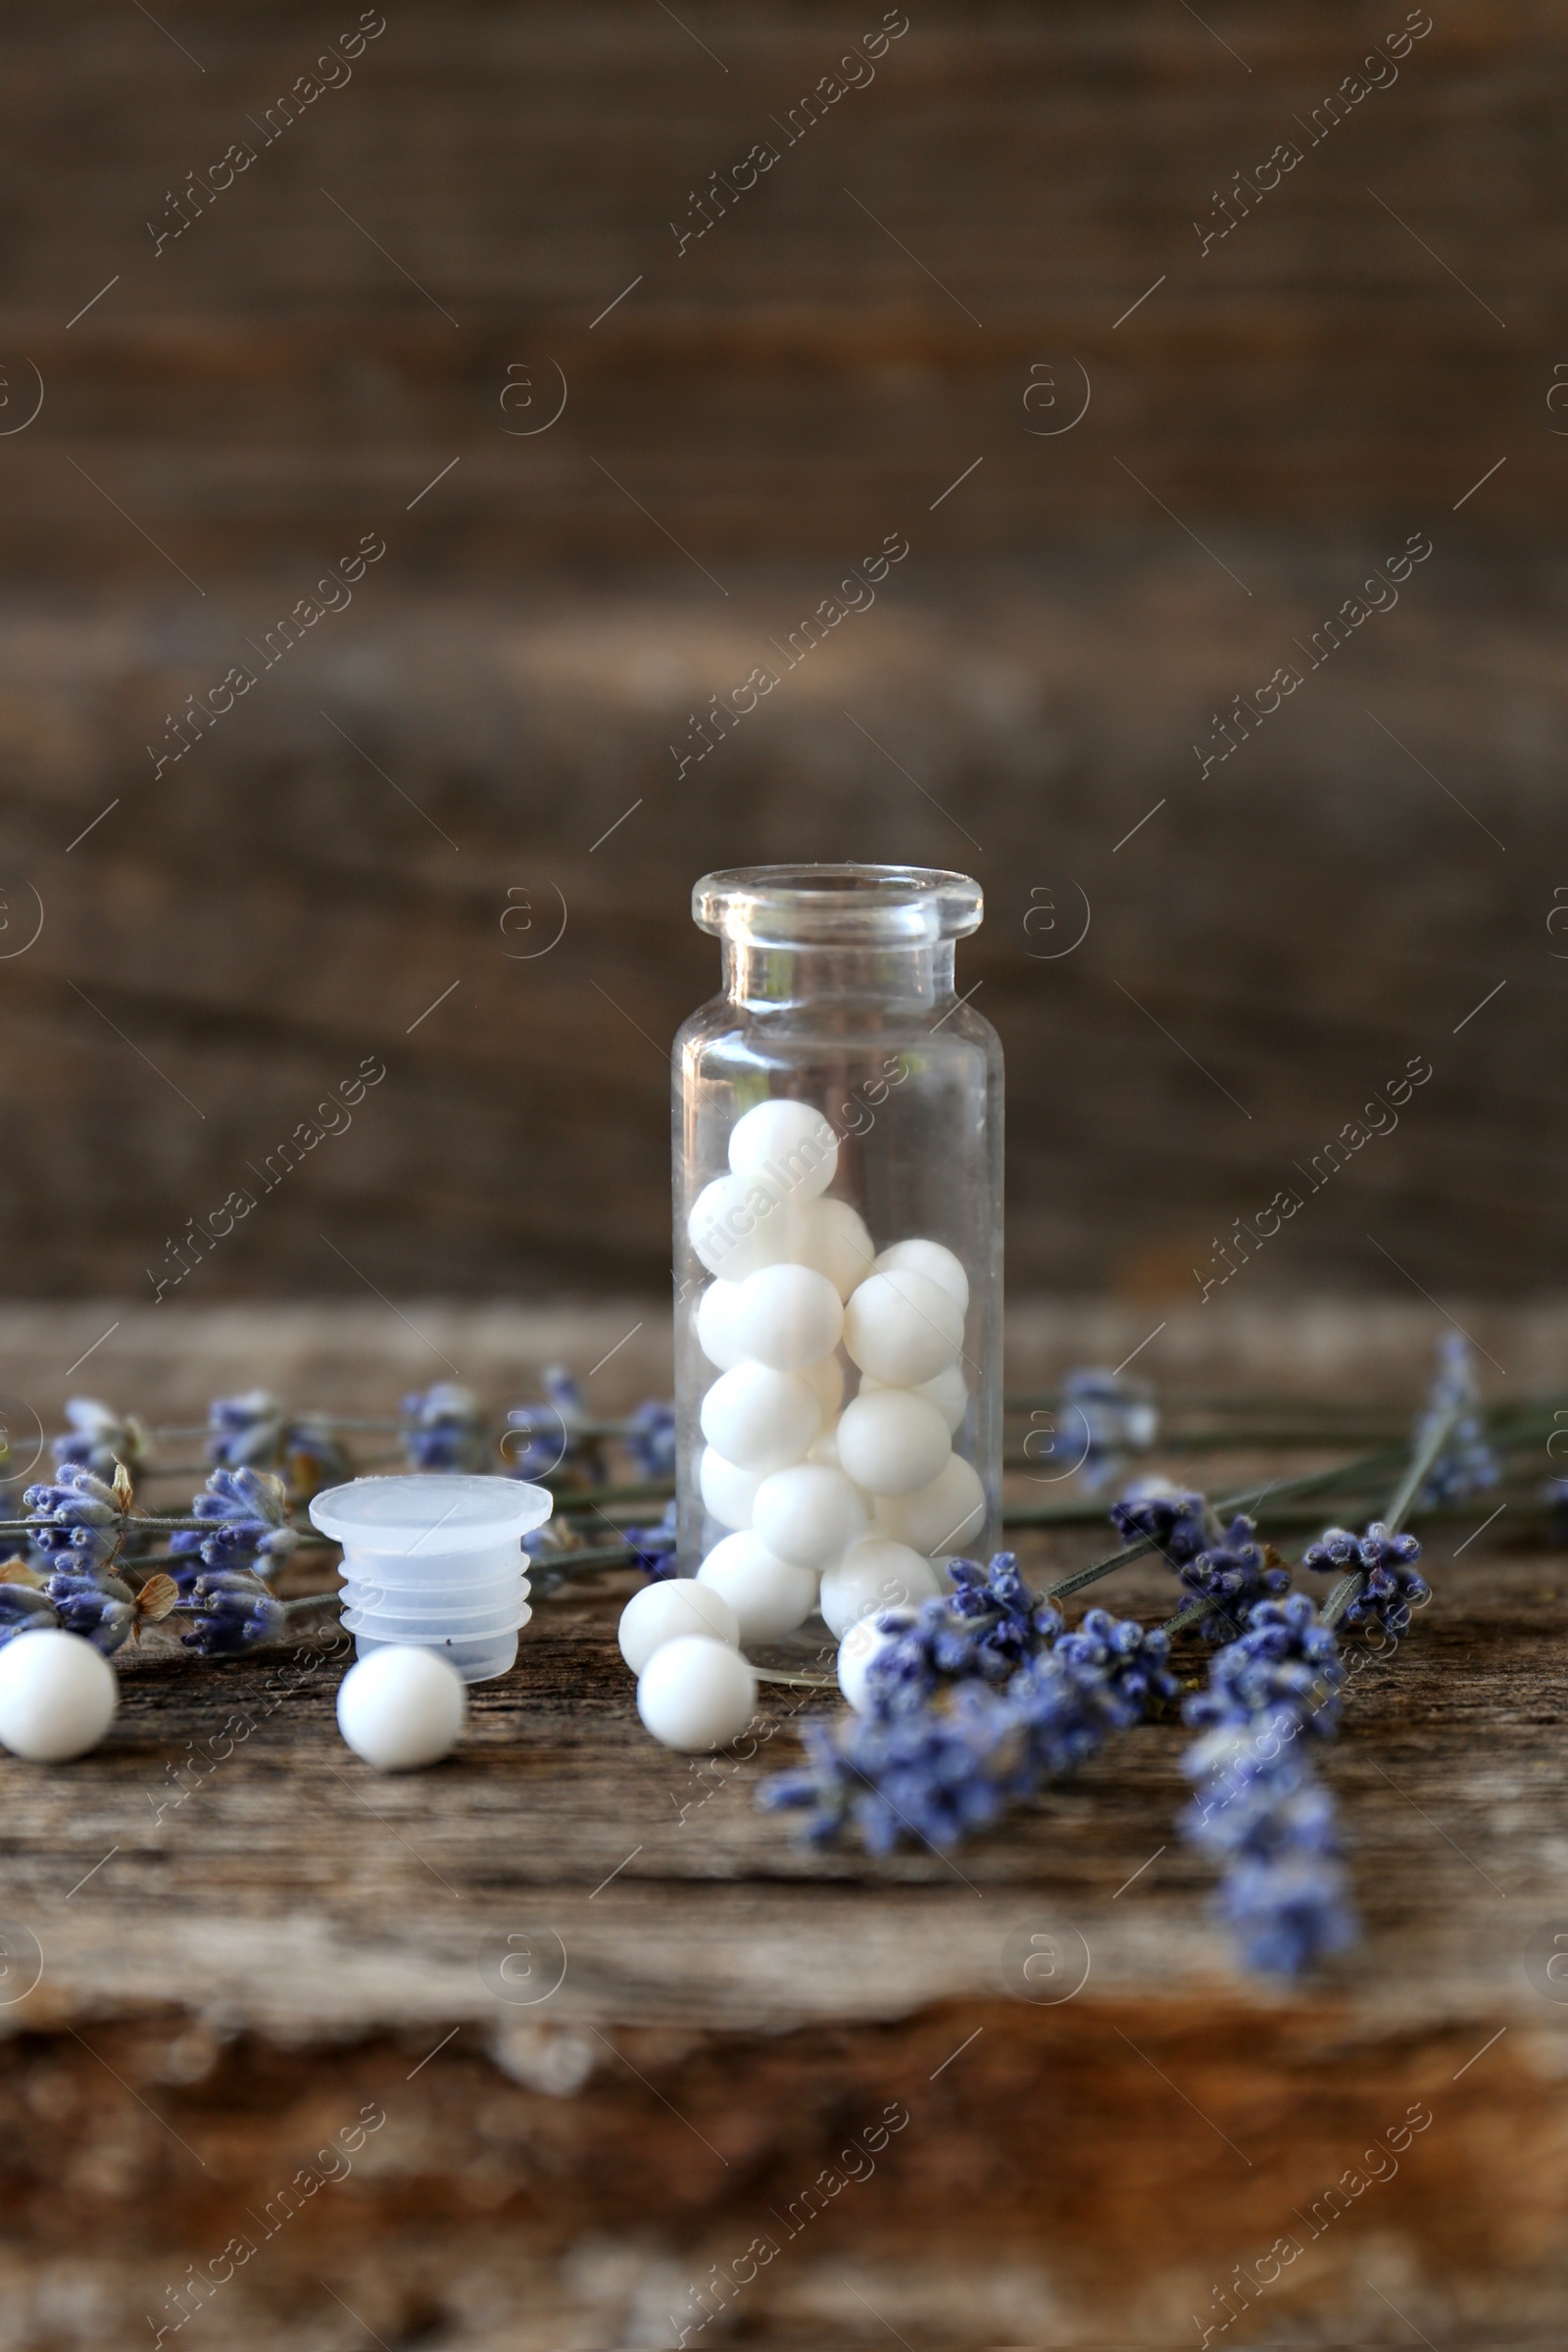 Photo of Bottle with homeopathic remedy and lavender flowers on wooden table